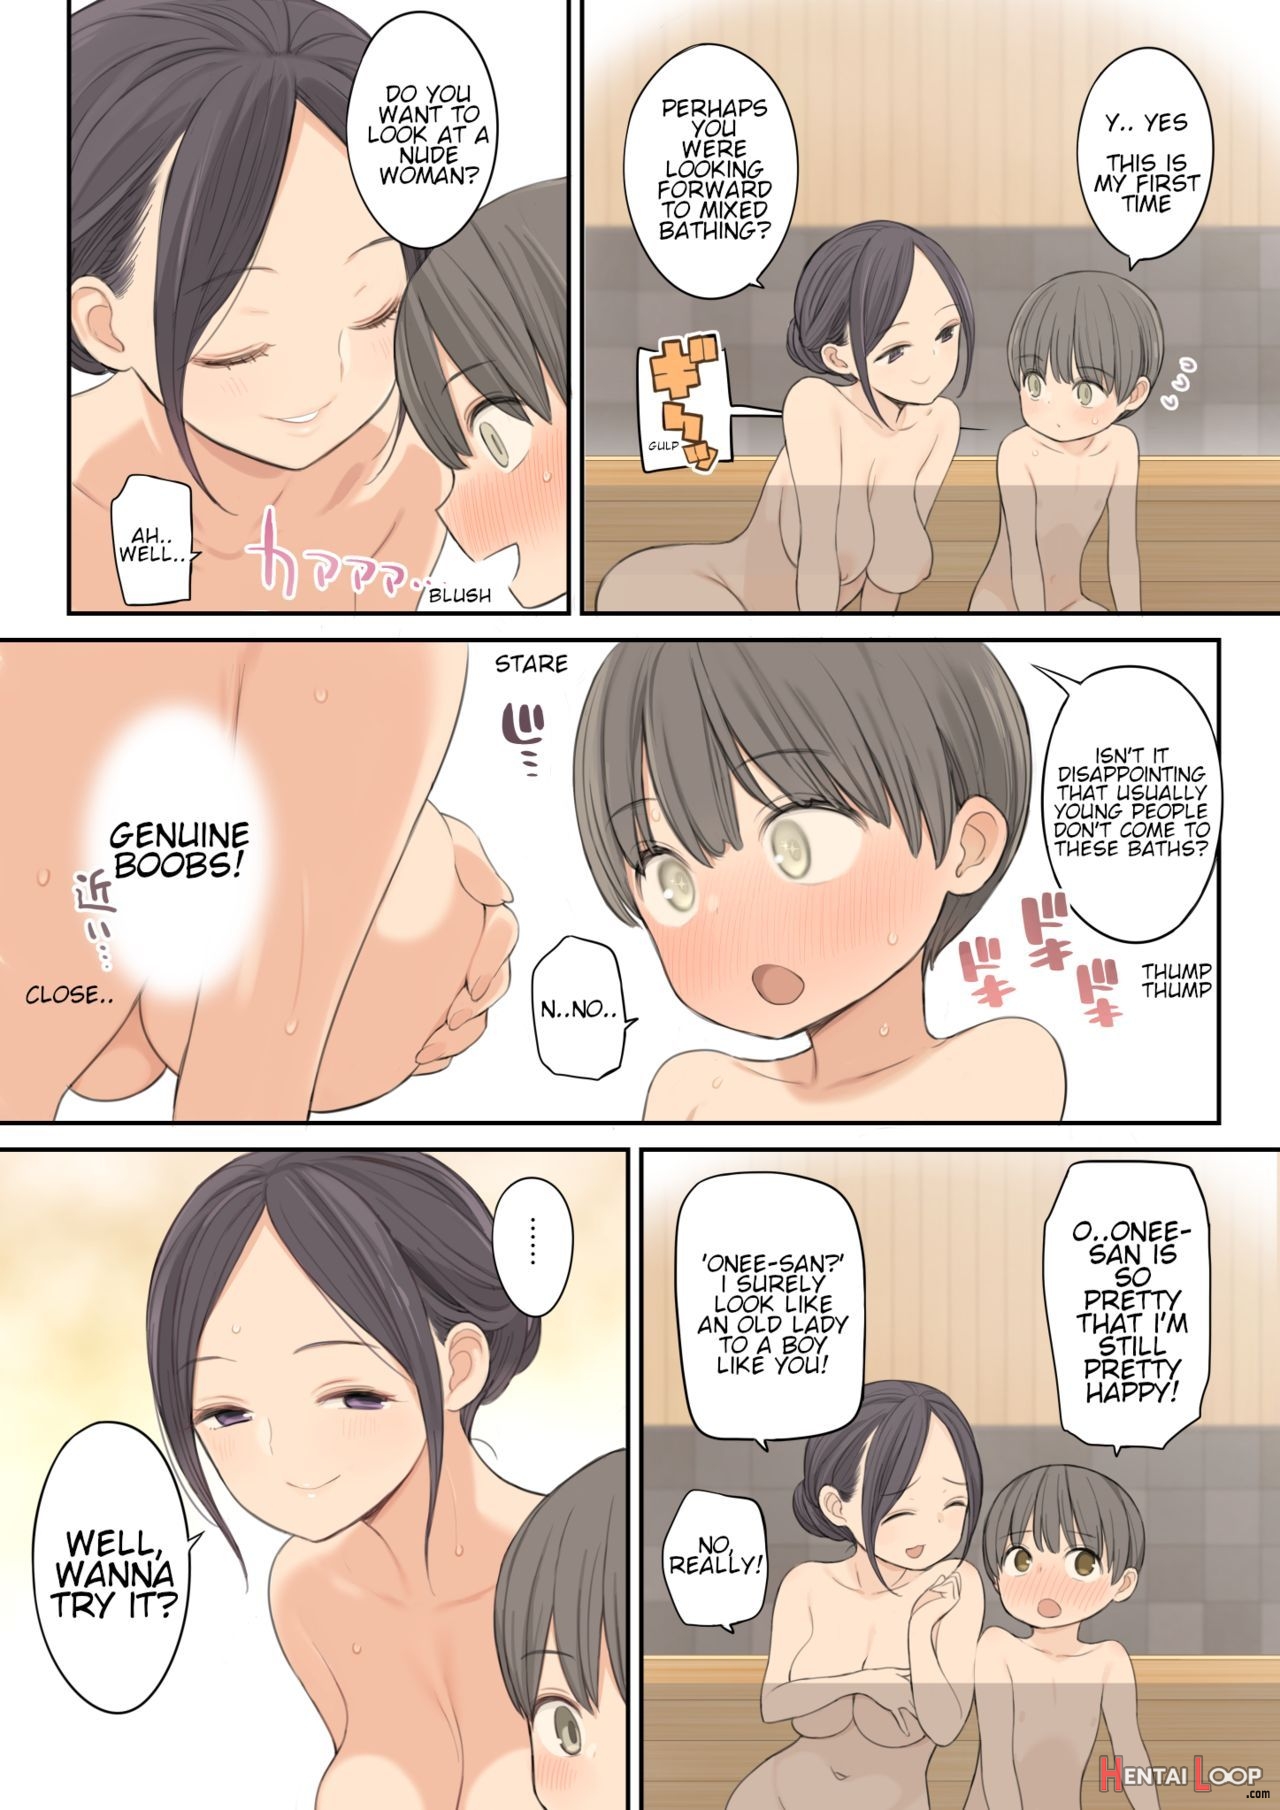 Story Of How I Came A Lot With An Older Oneesan At The Mixed Hot Spring Bath page 7